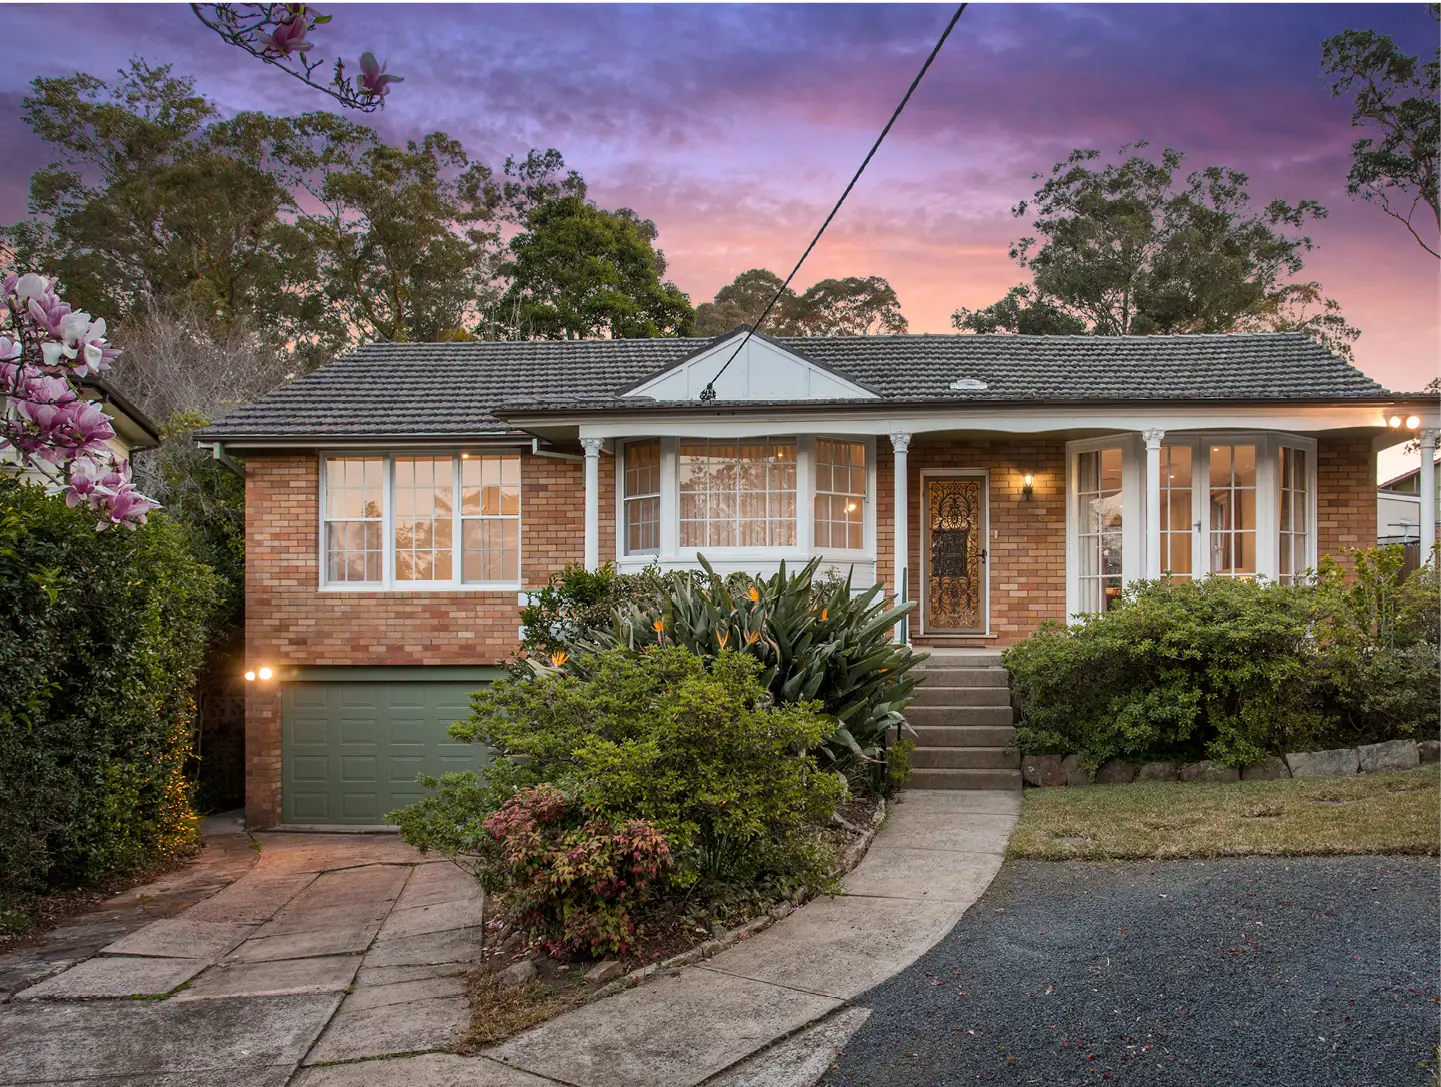 Photo #1: 17 Jadchalm Street, West Pennant Hills - Sold by Louis Carr Real Estate